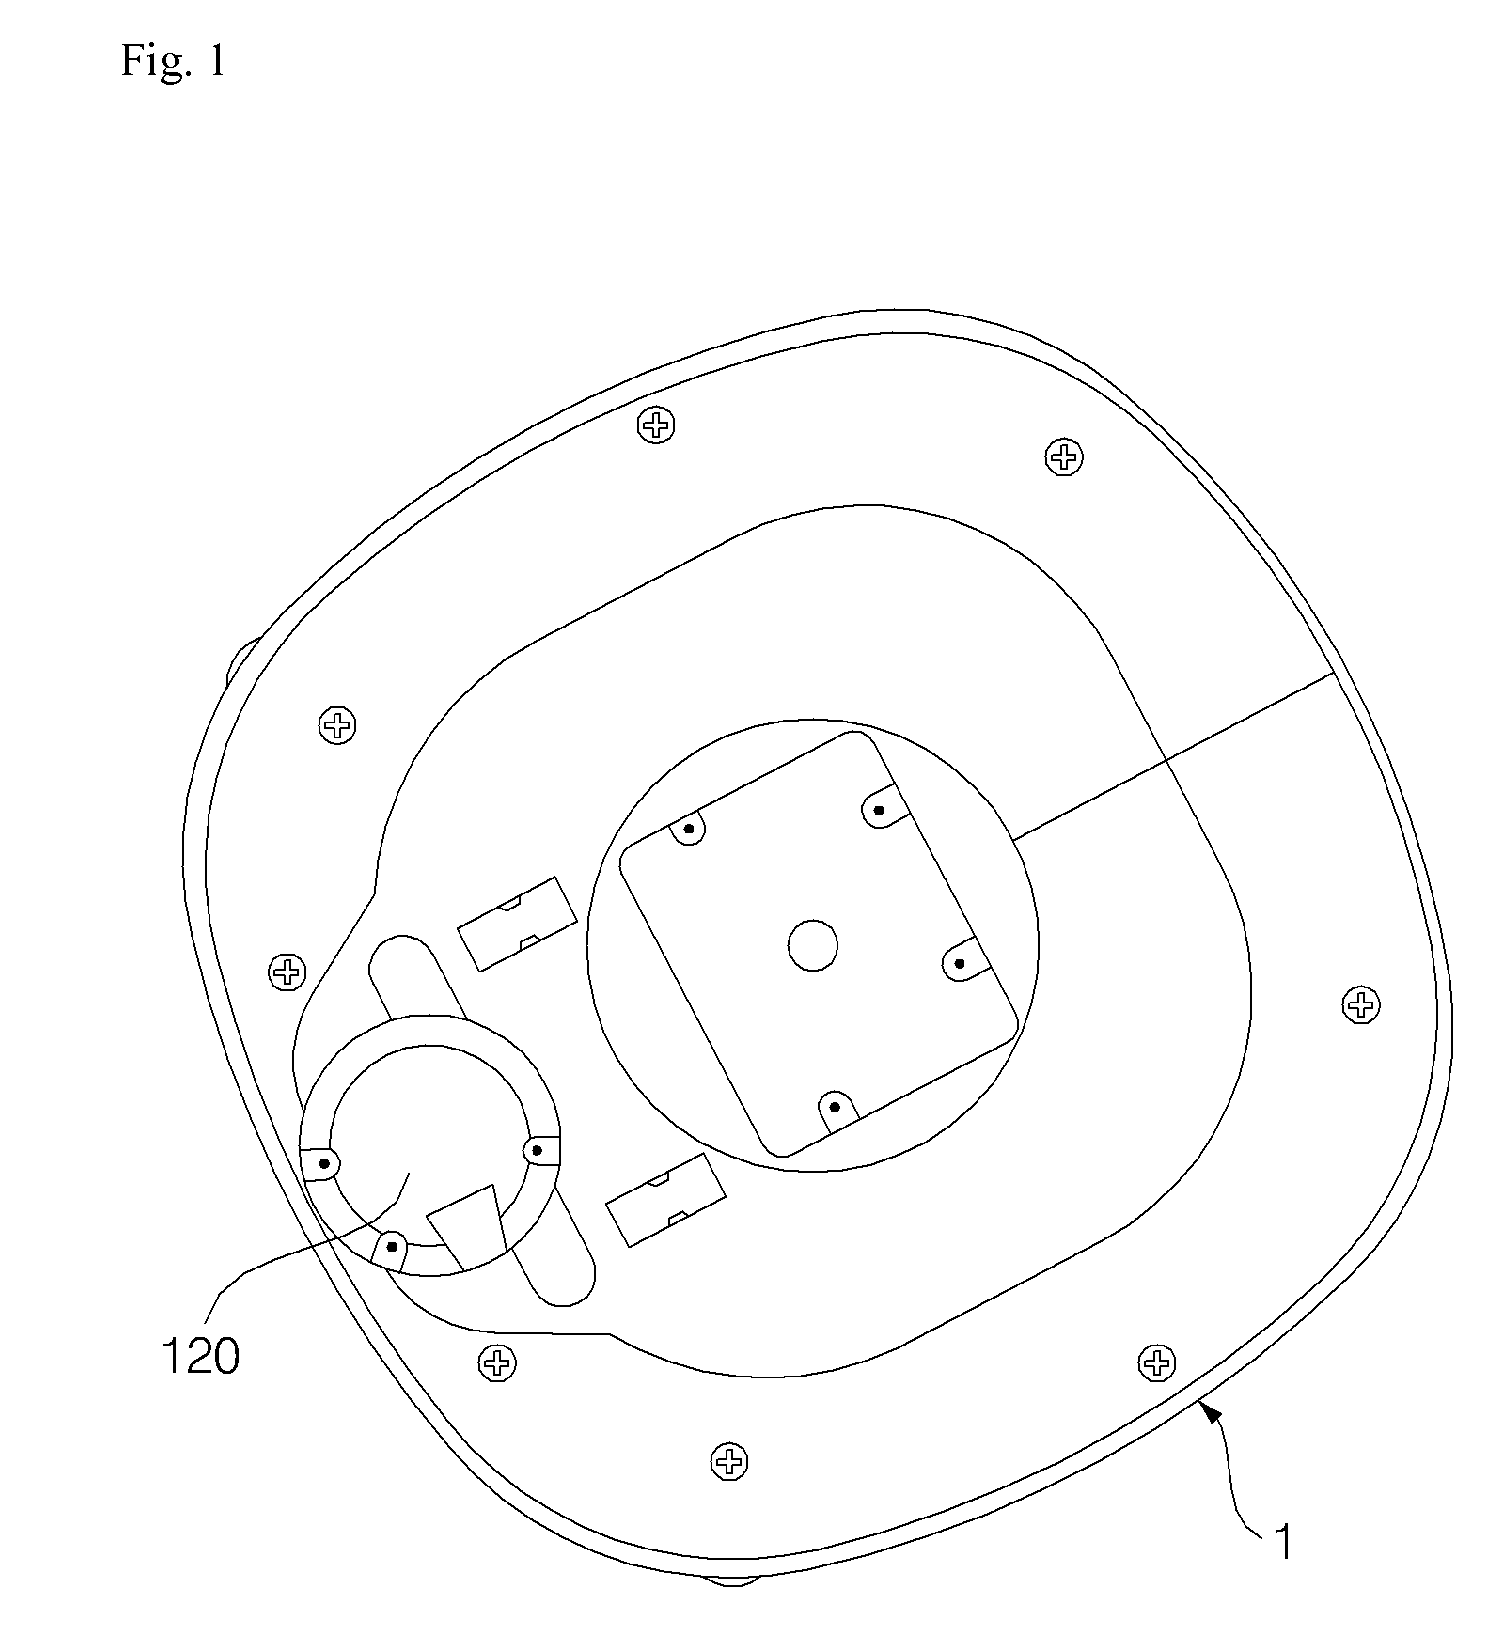 Robot cleaner and method of operating the same